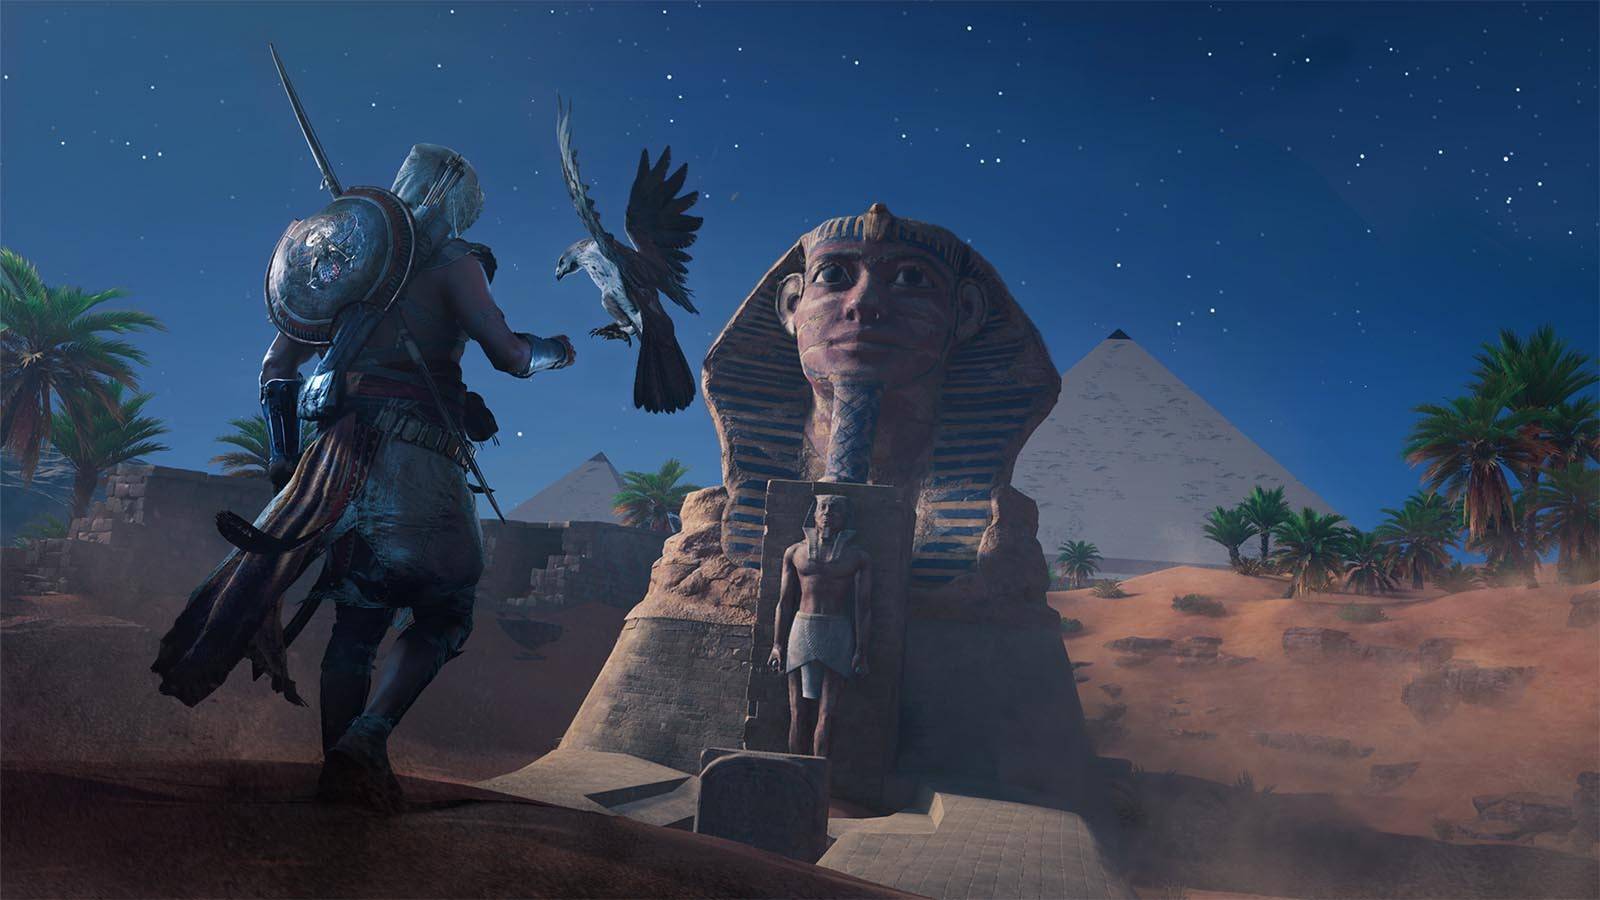 What's the cheapest copy of Assassin's Creed Origins you can buy? Best  prices for PS4, Xbox One and PC